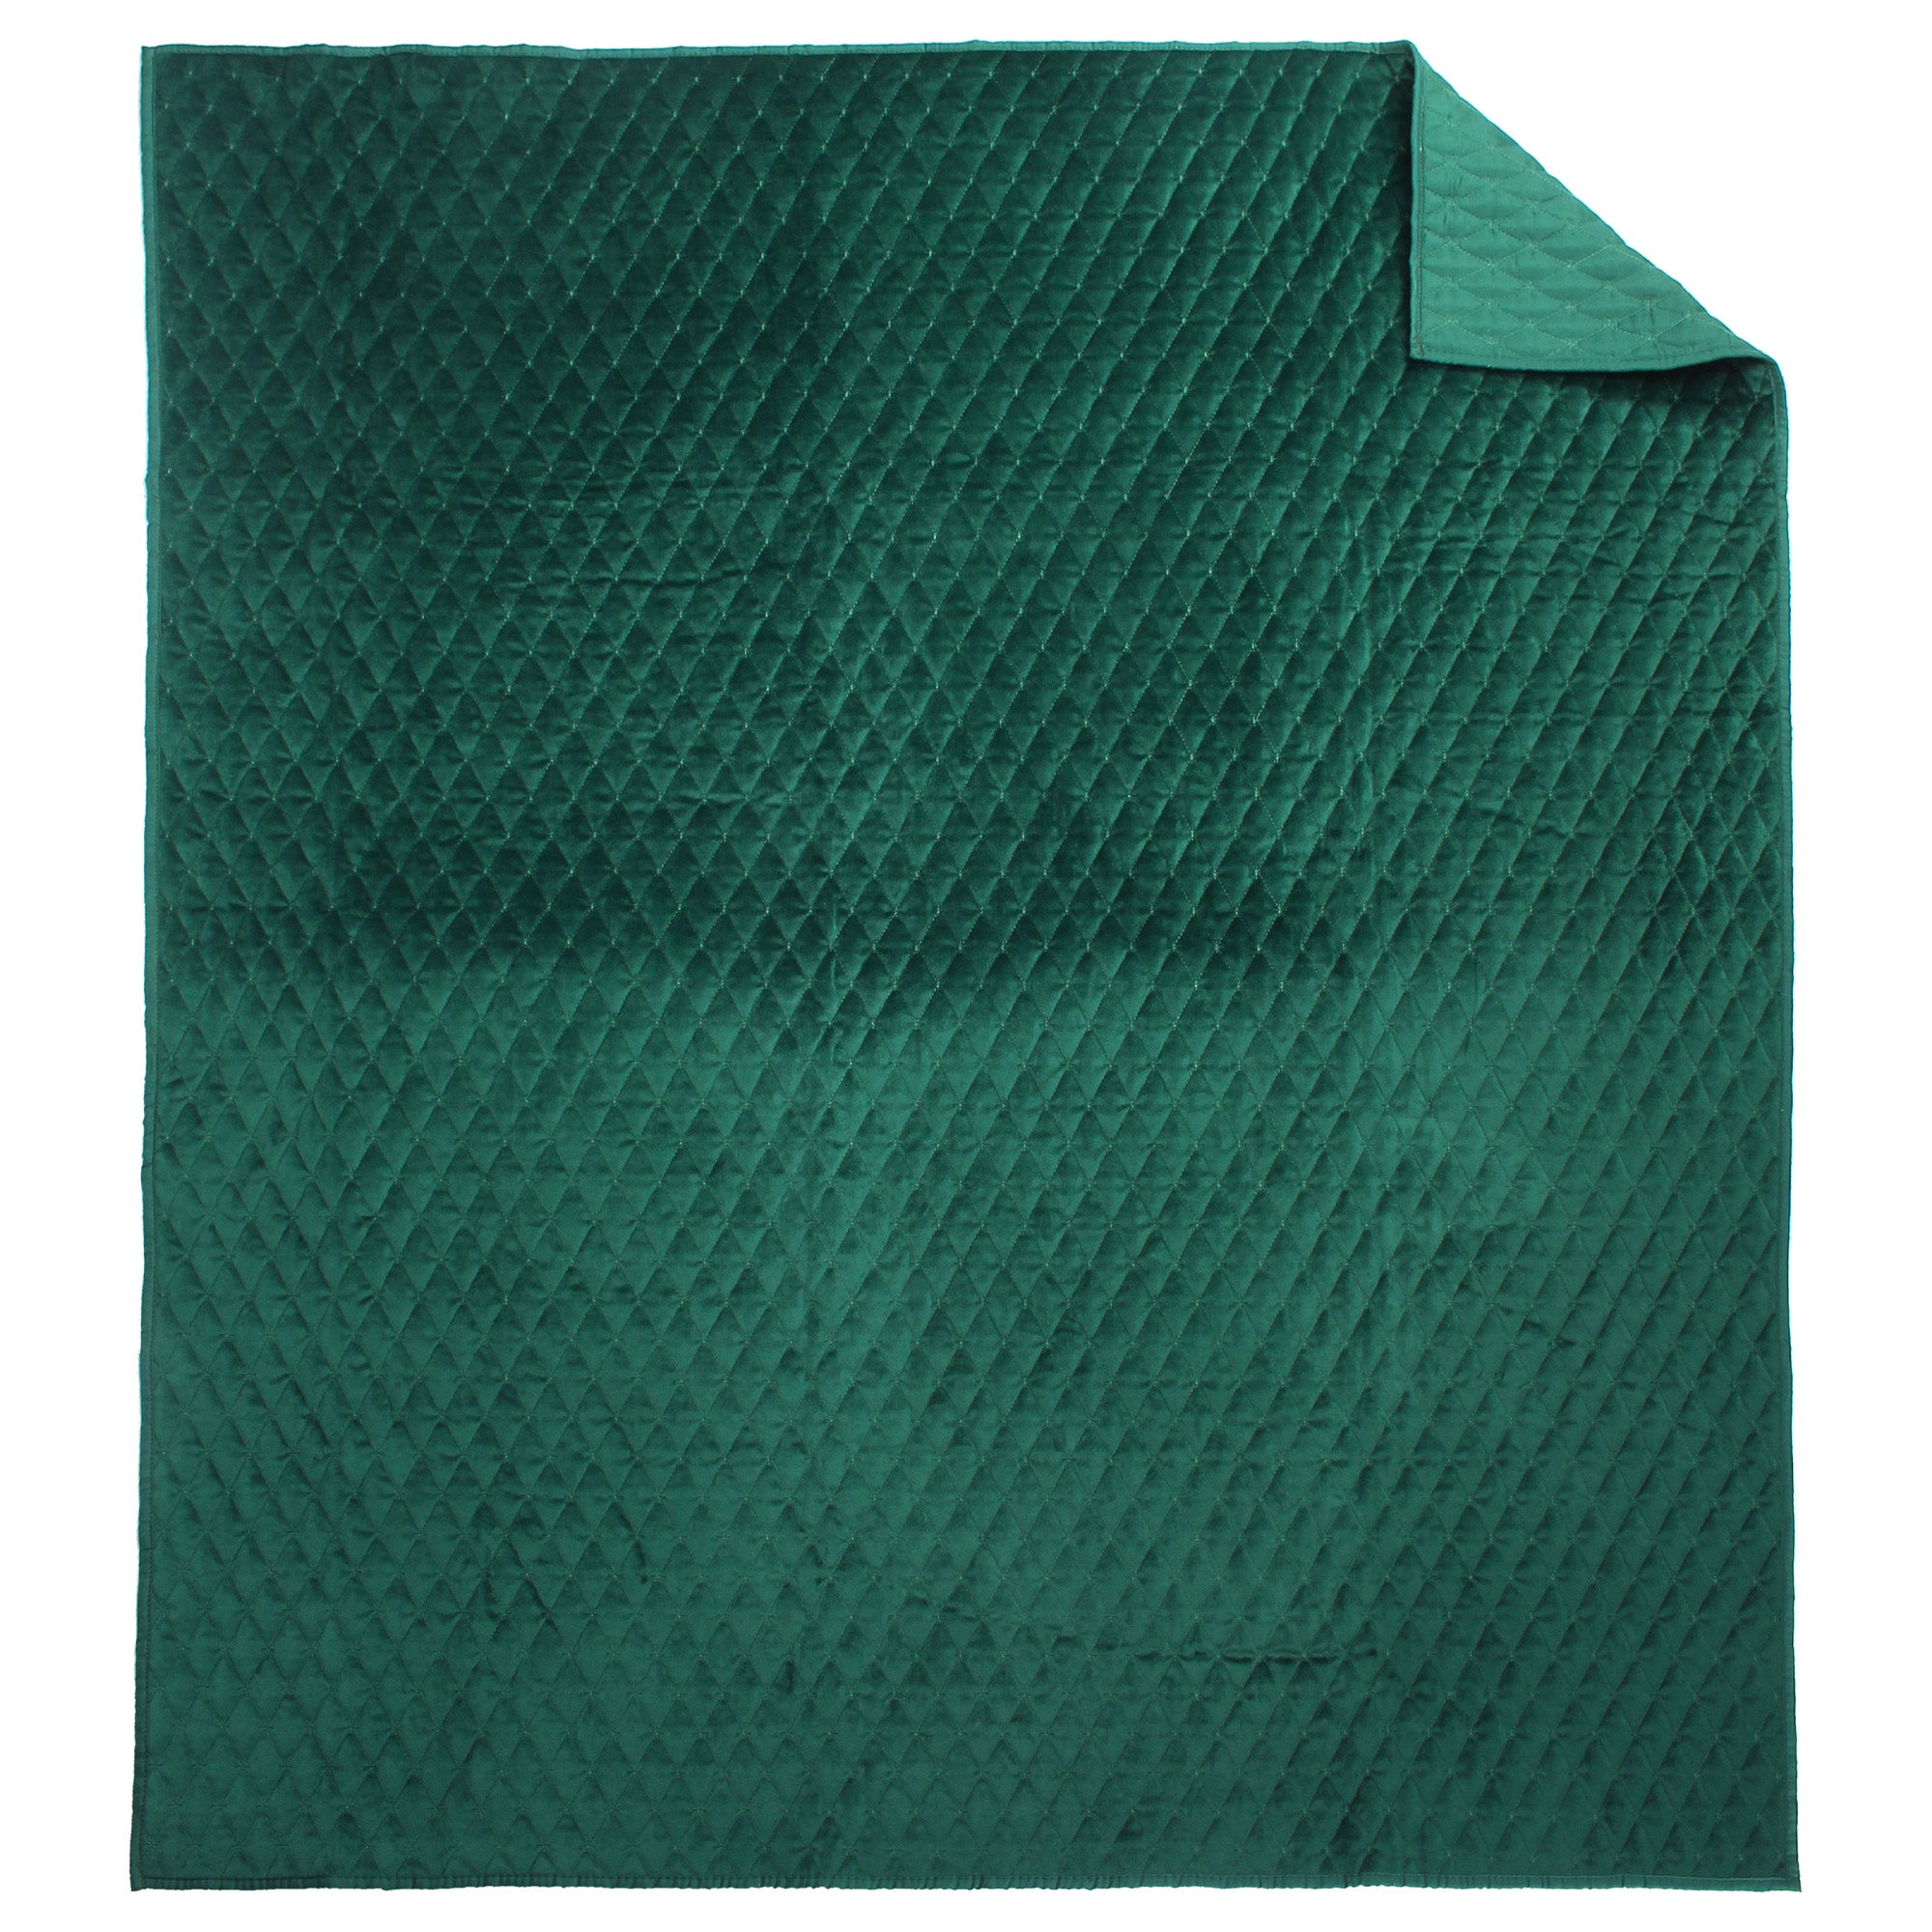 BH Empire Velvet Green Quilted Throw